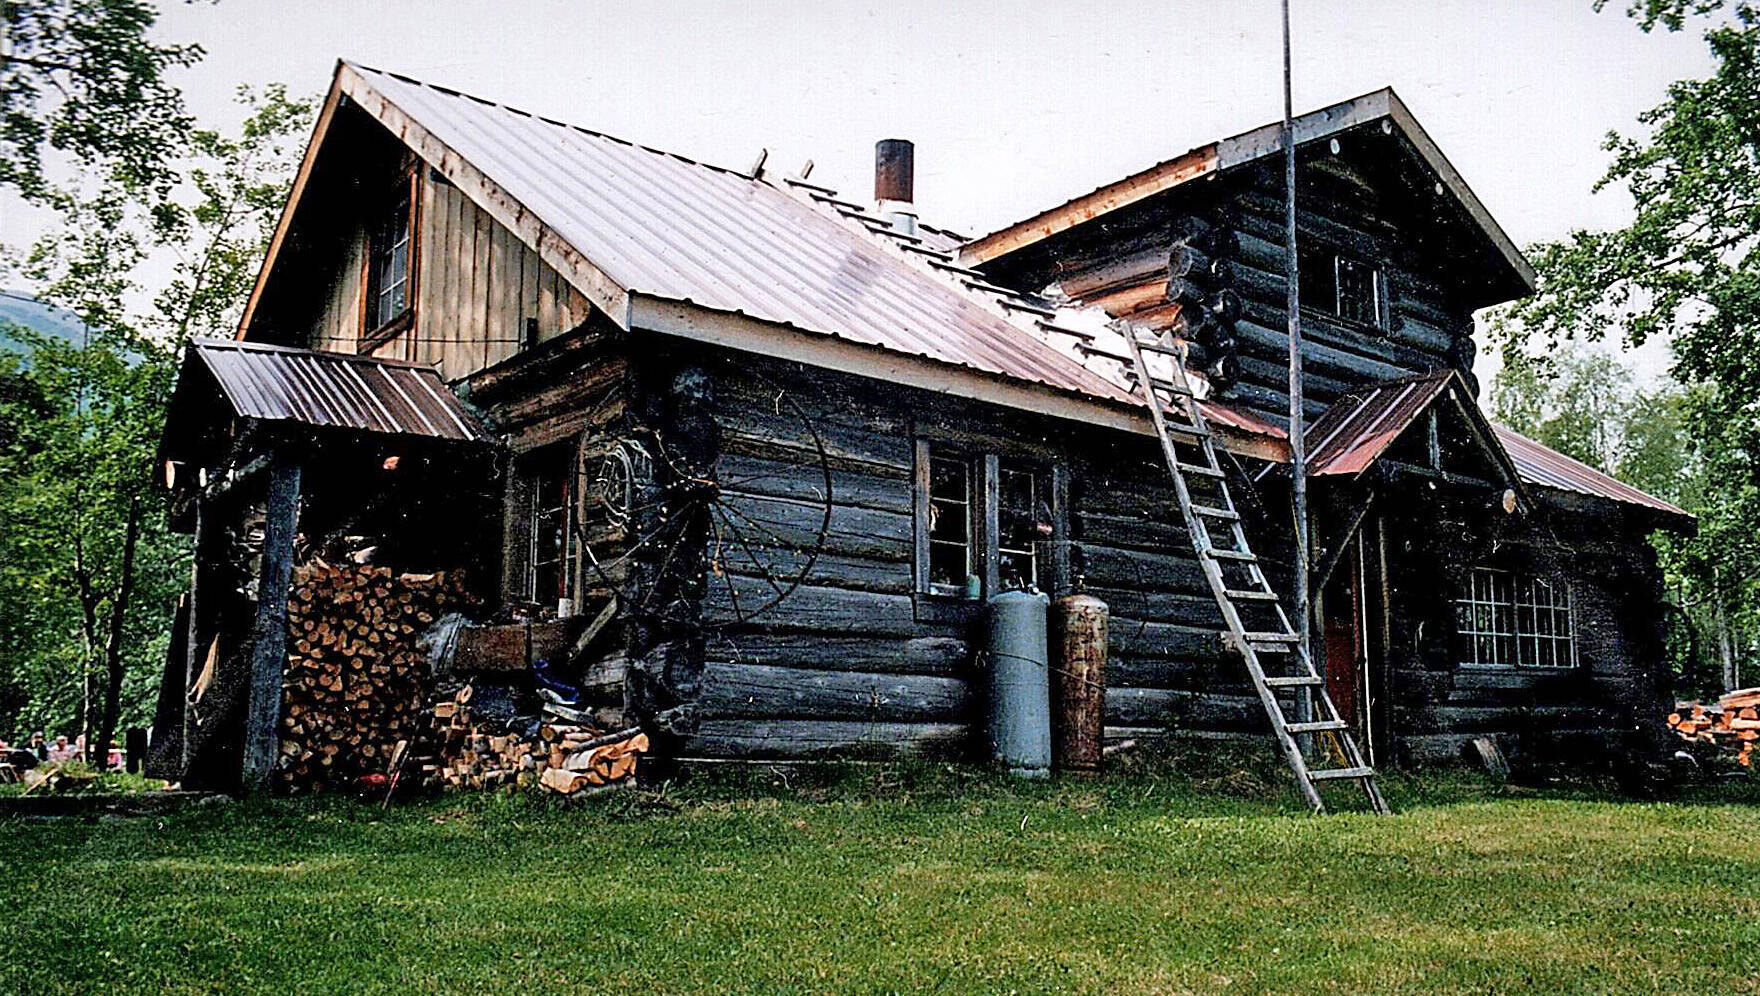 The Emma and Carl Clark house dominated the hillside west of the mouth of Resurrection Creek in Hope for many decades. This photo was taken in 1991. (Photo 210.029.164, from the Clark Collection, courtesy of Hope and Sunrise Historical and Mining Museum)